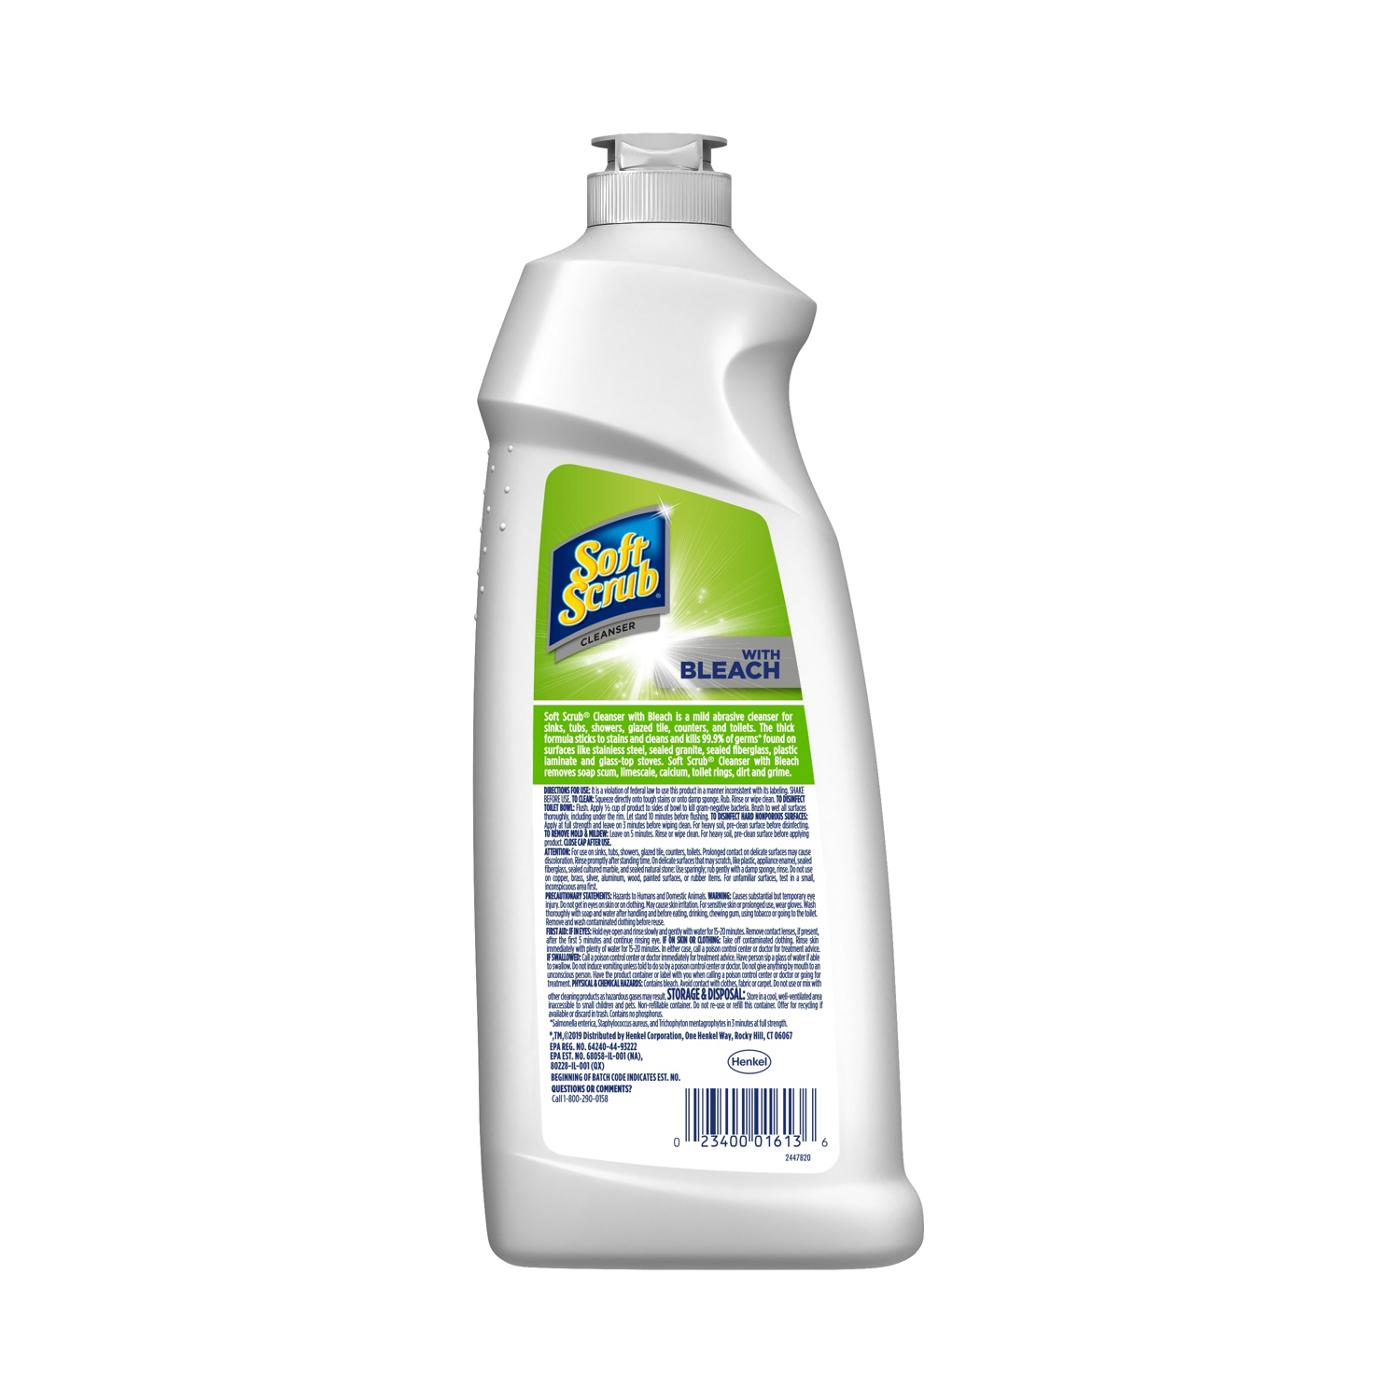 Soft Scrub Cleanser with Bleach; image 2 of 2